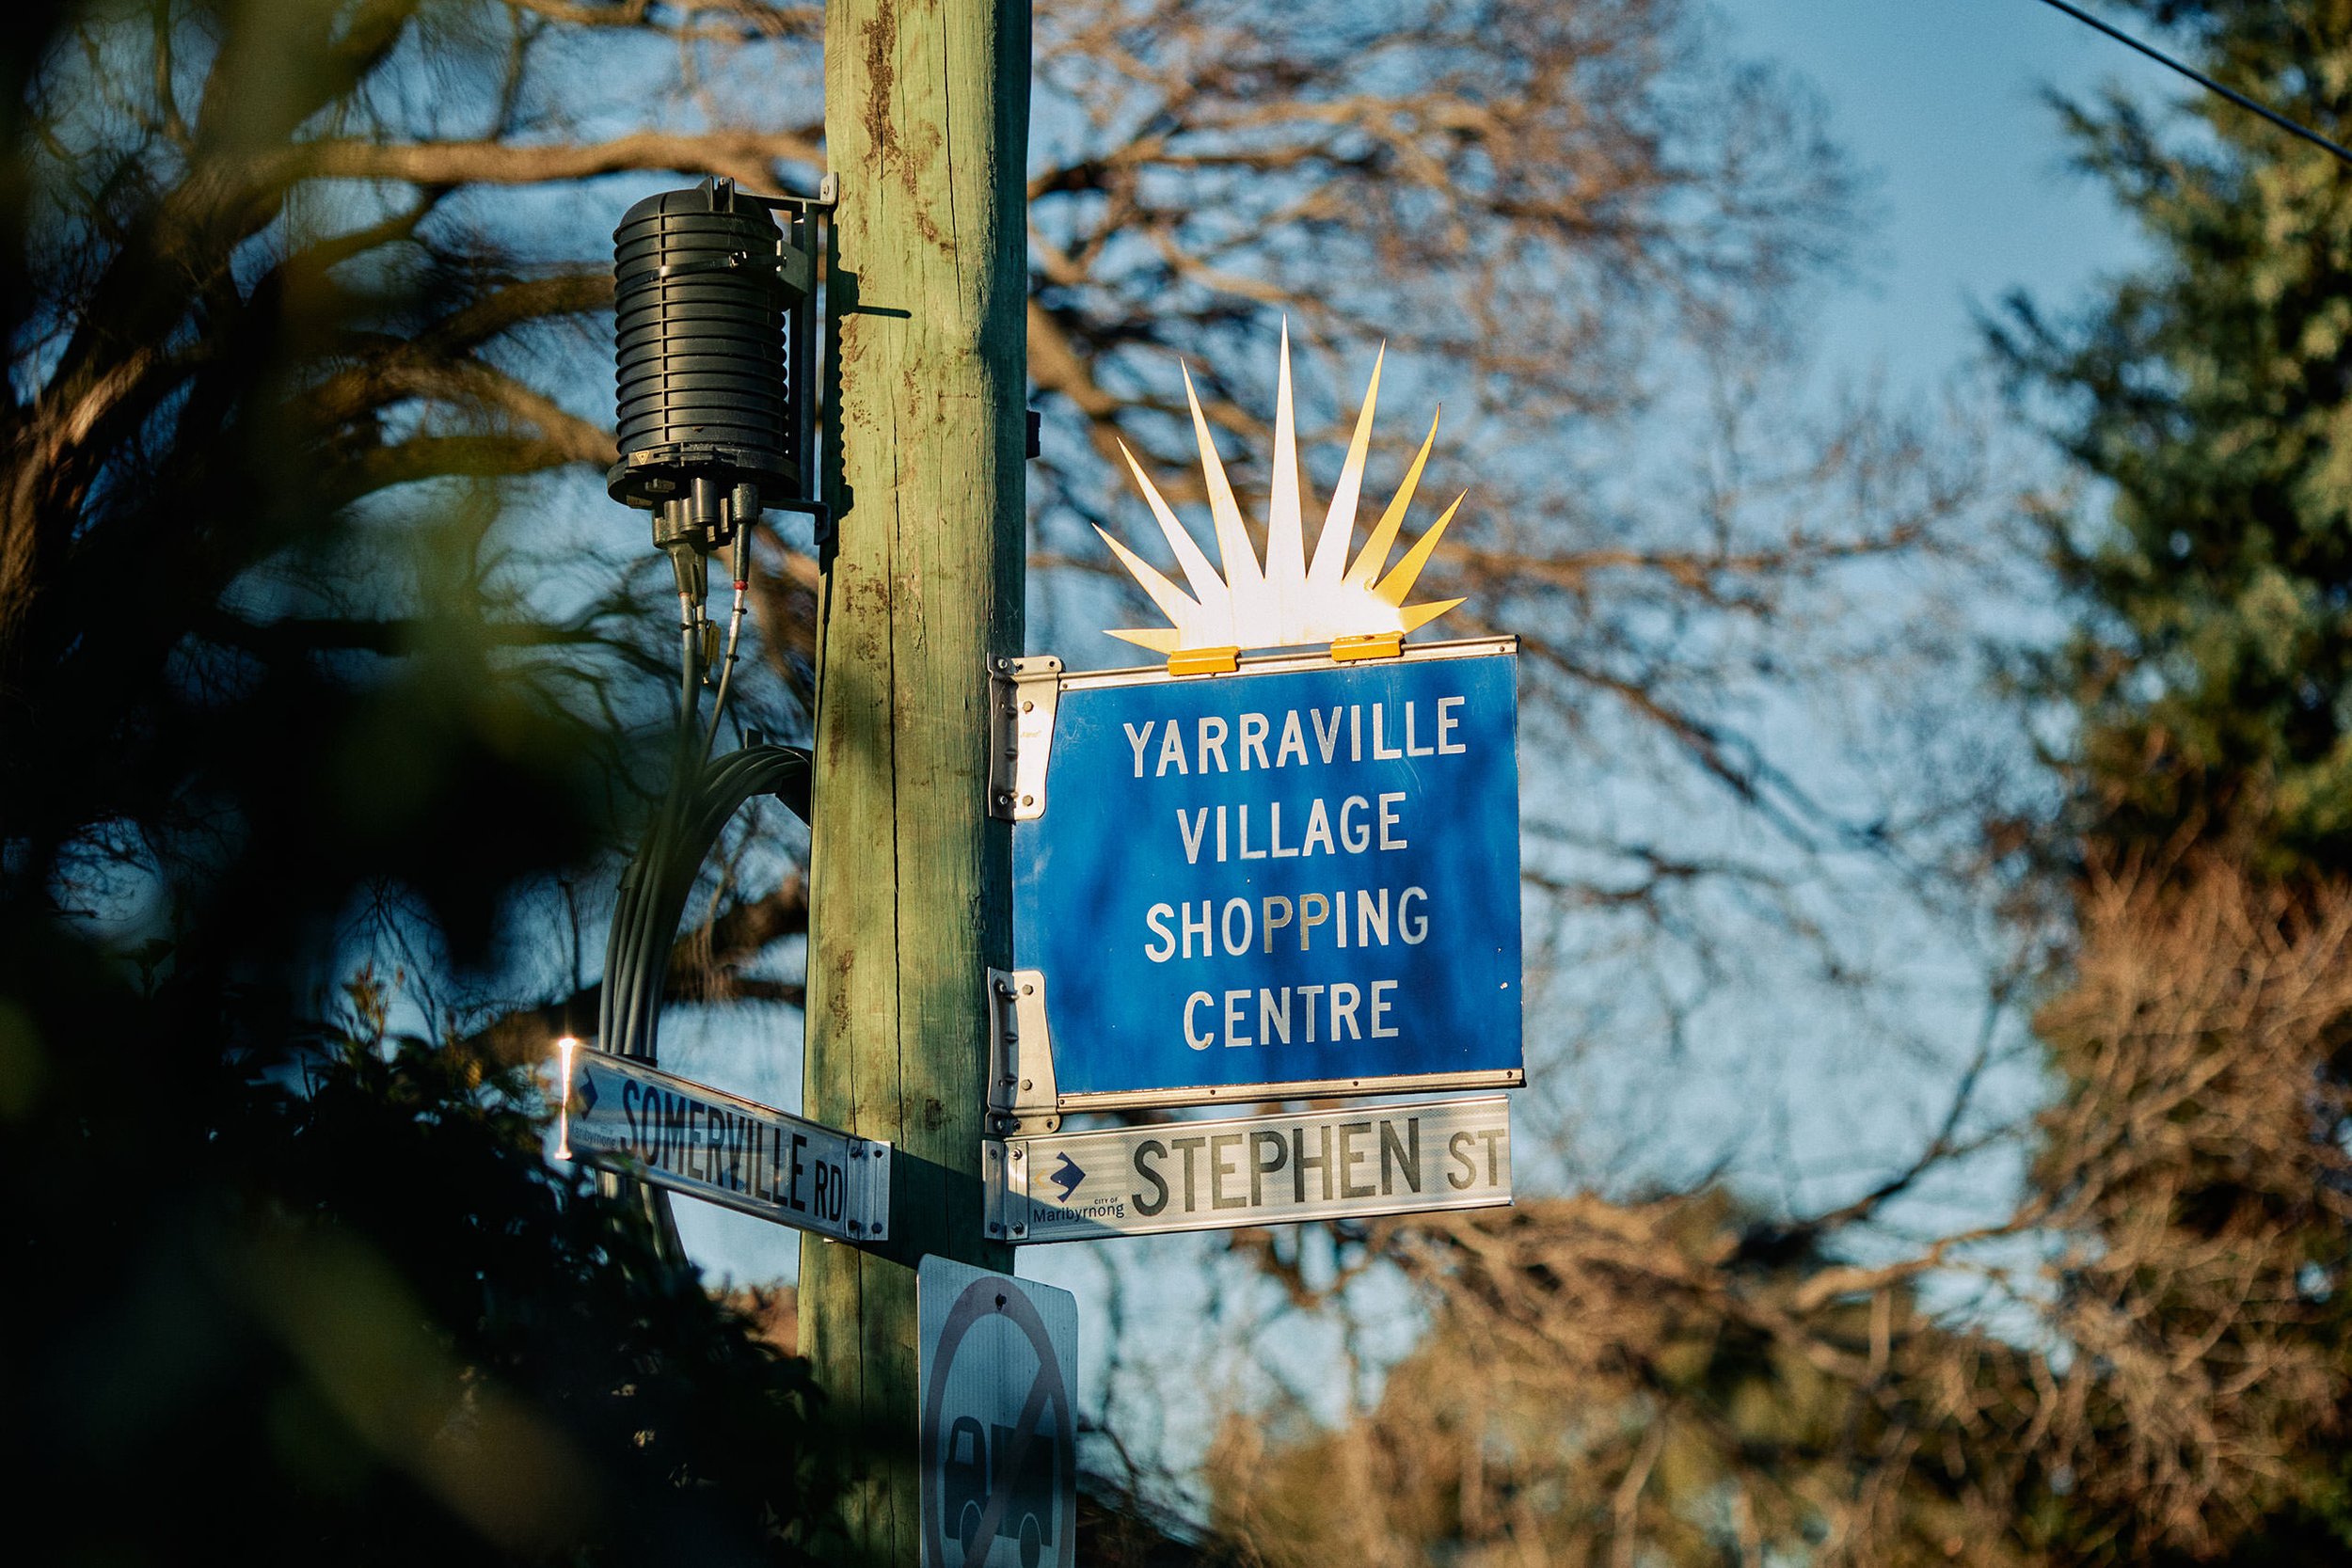 A short stroll away is the quaint and charming Yarraville Village